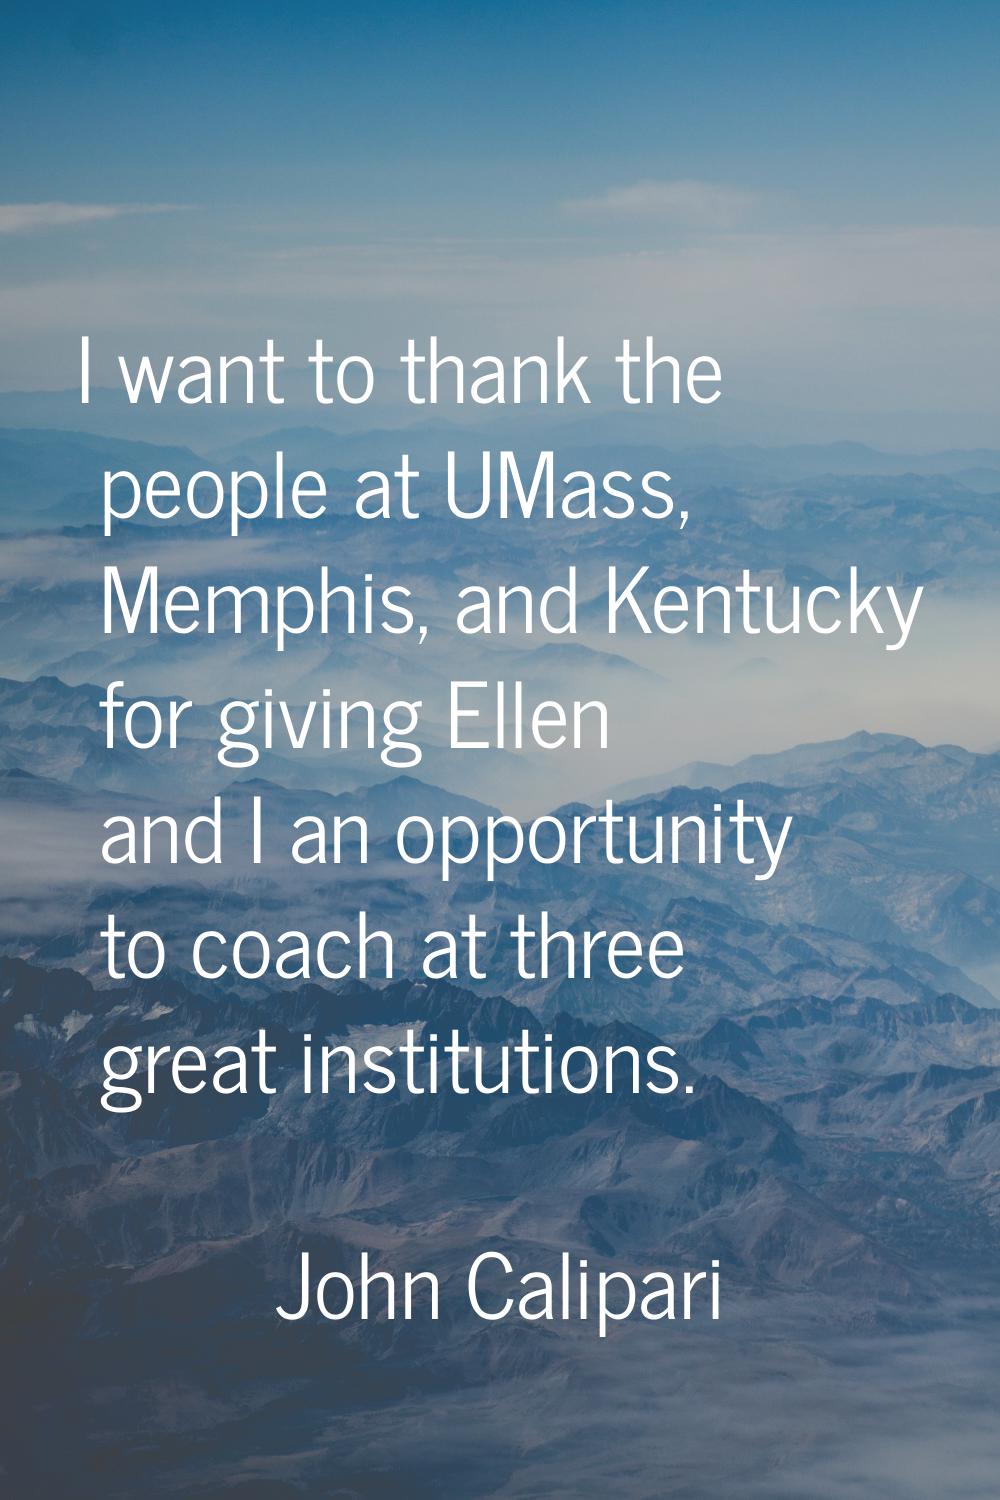 I want to thank the people at UMass, Memphis, and Kentucky for giving Ellen and I an opportunity to